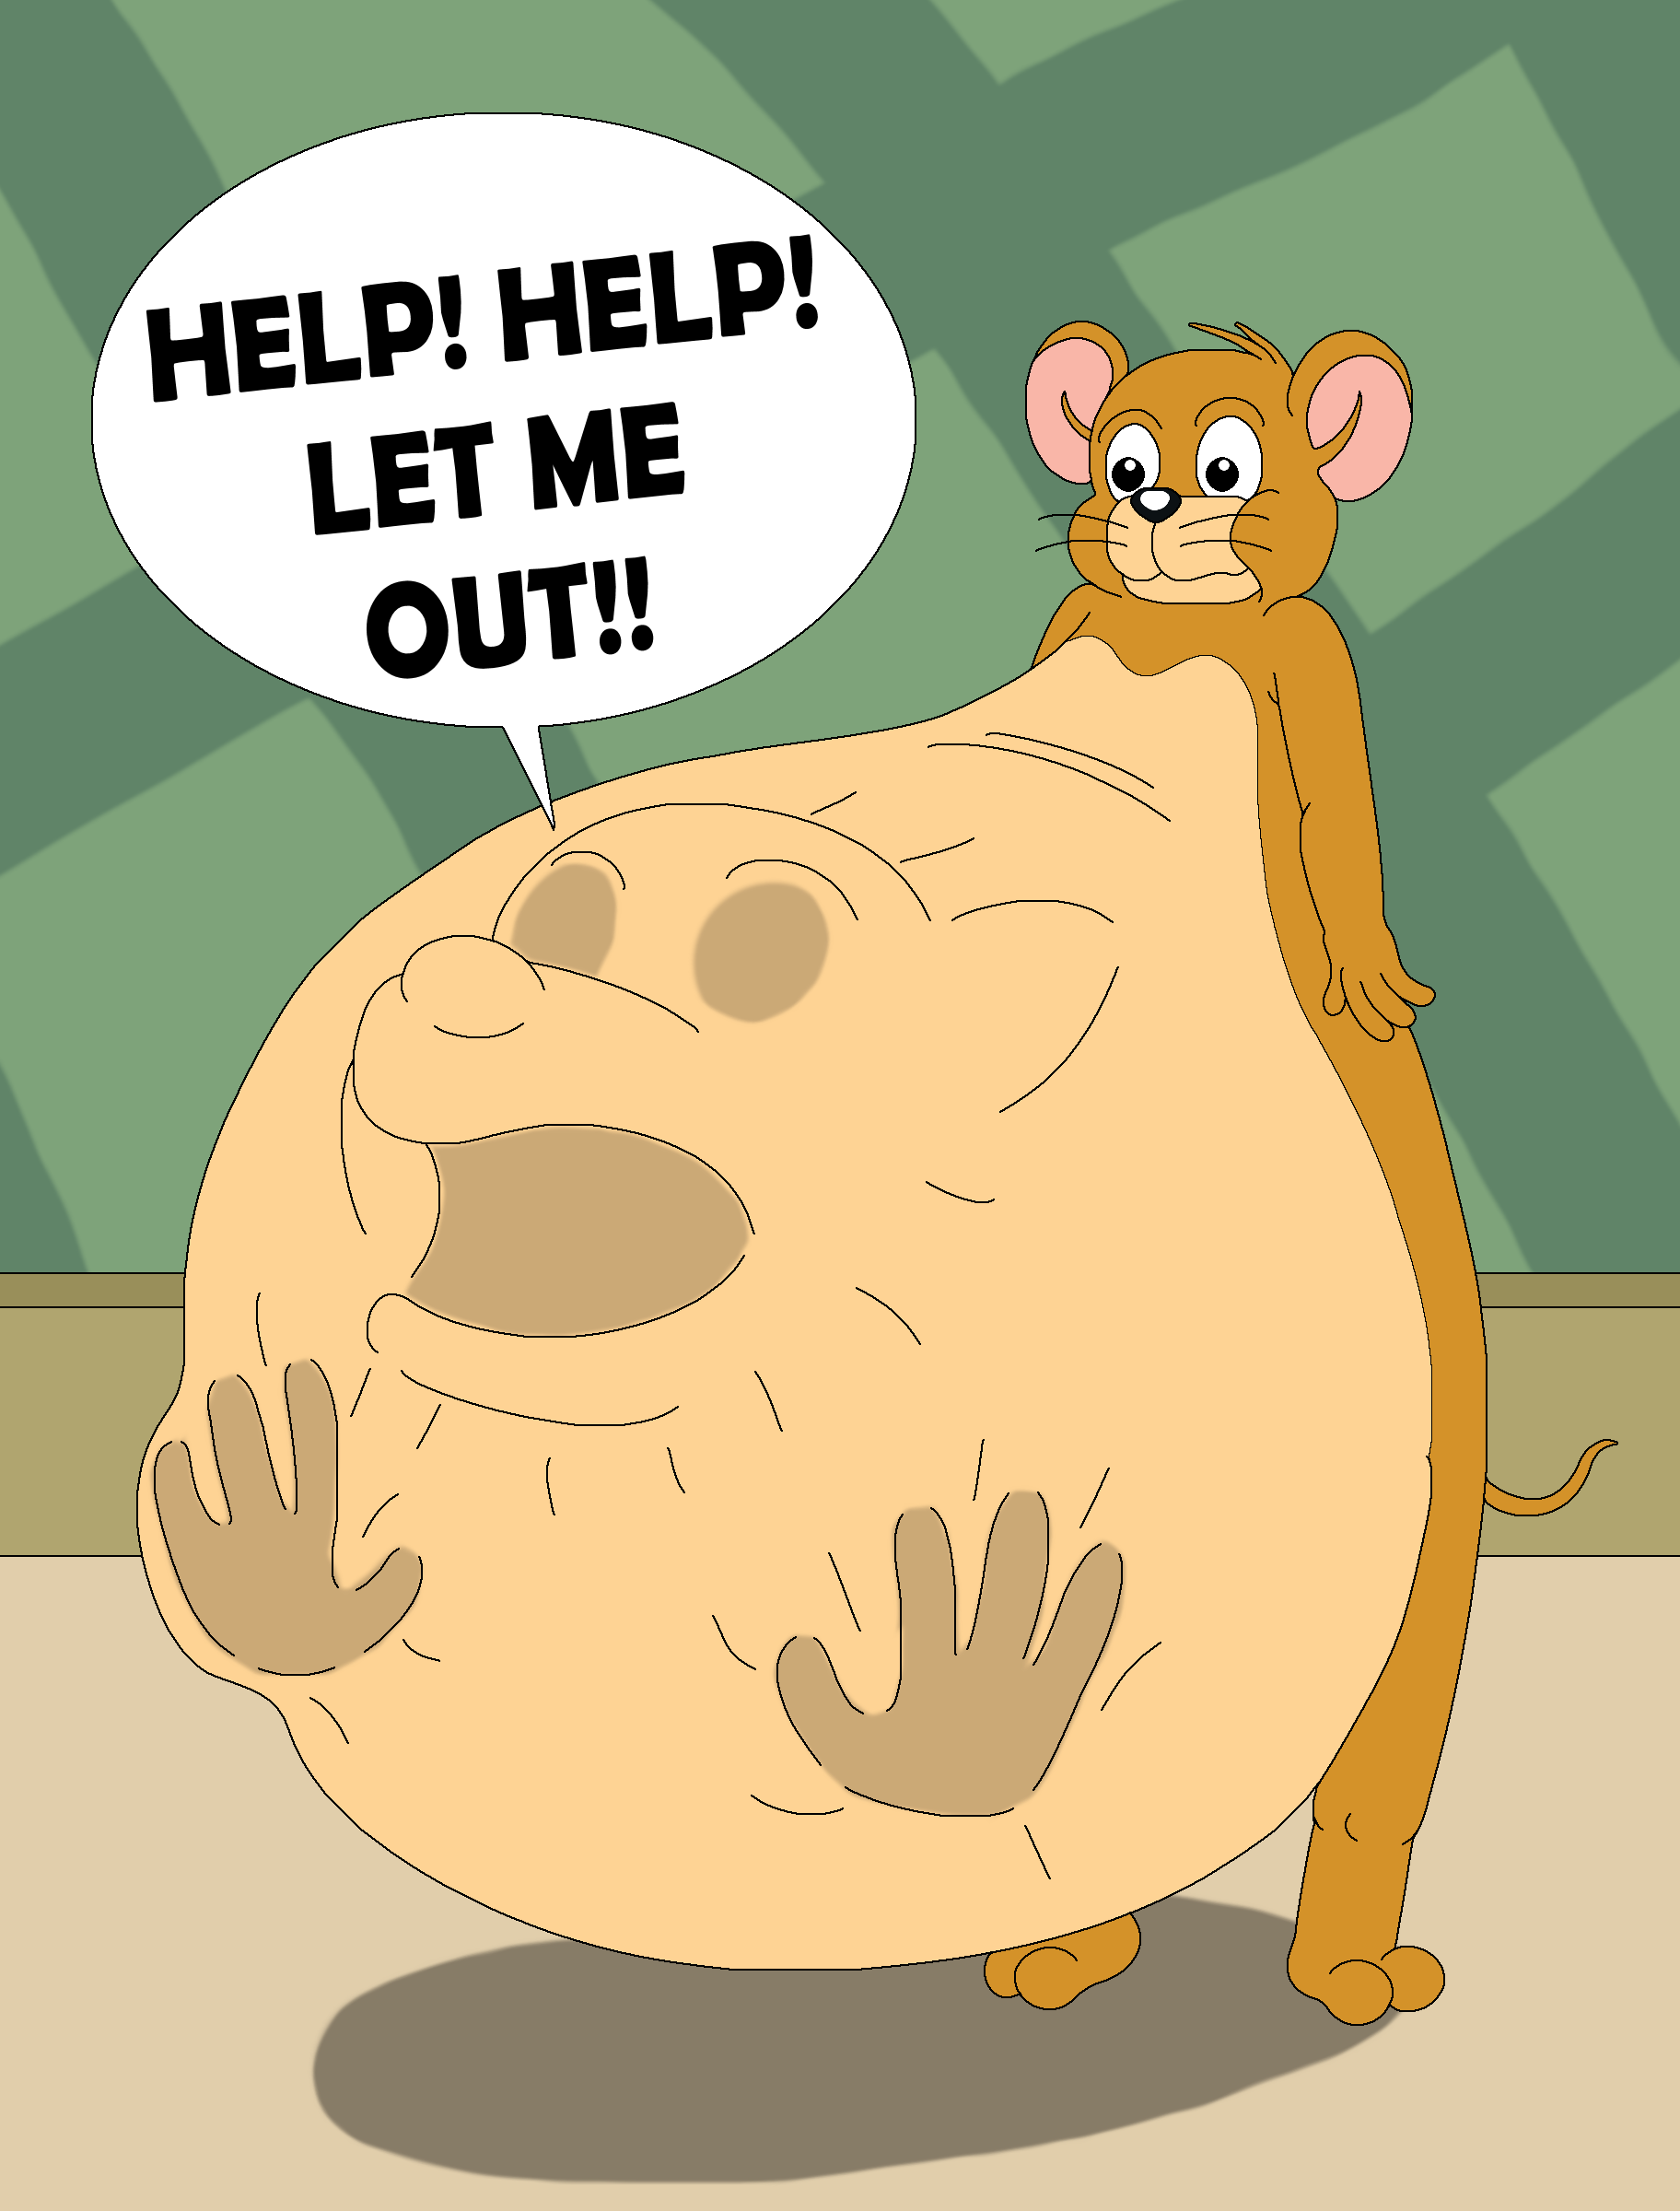 Impolite Play with tower Tom gets inside Jerry's stomach by MCsaurus on DeviantArt